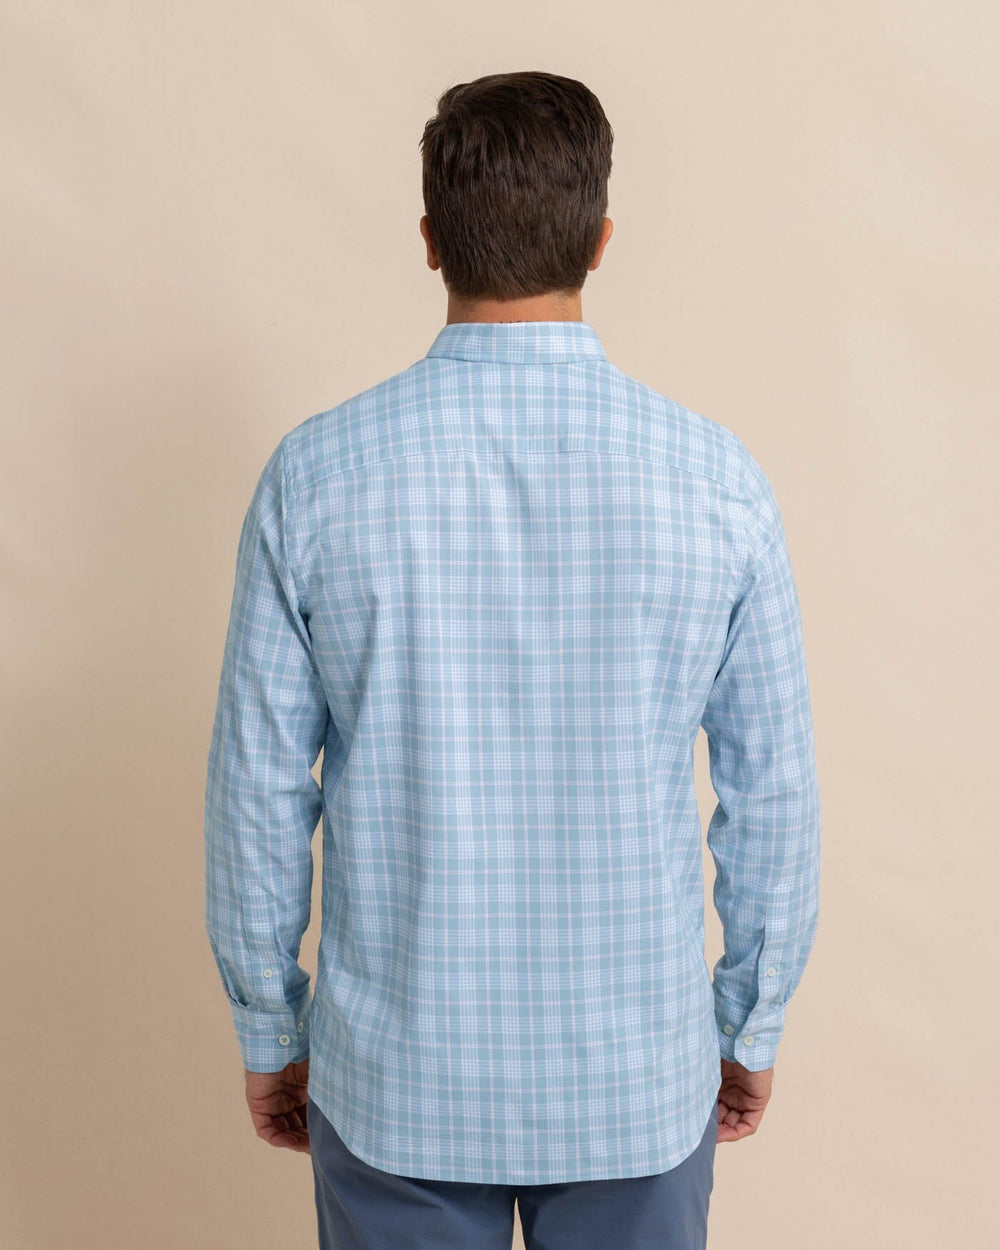 The back view of the Southern Tide Intercoastal Primrose Plaid Long Sleeve Sport Shirt by Southern Tide - Subdued Blue